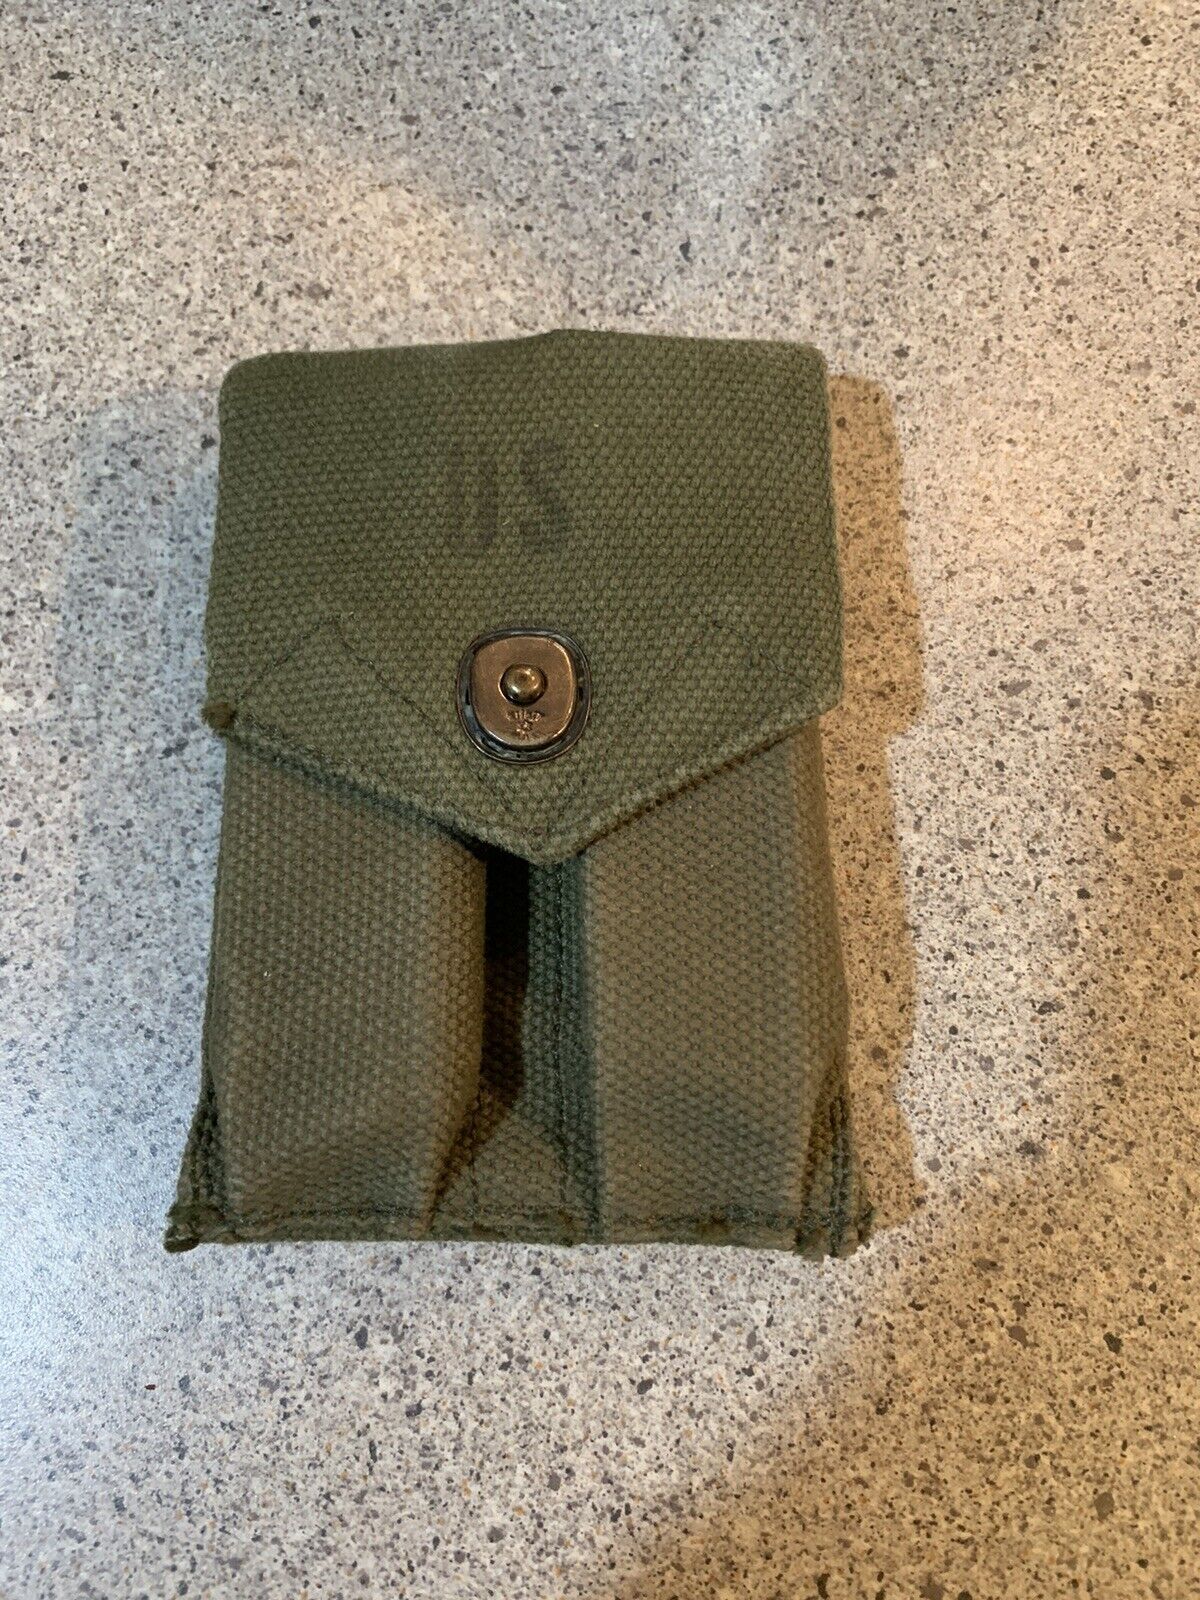 US ARMY 1911 pouch with two magazines